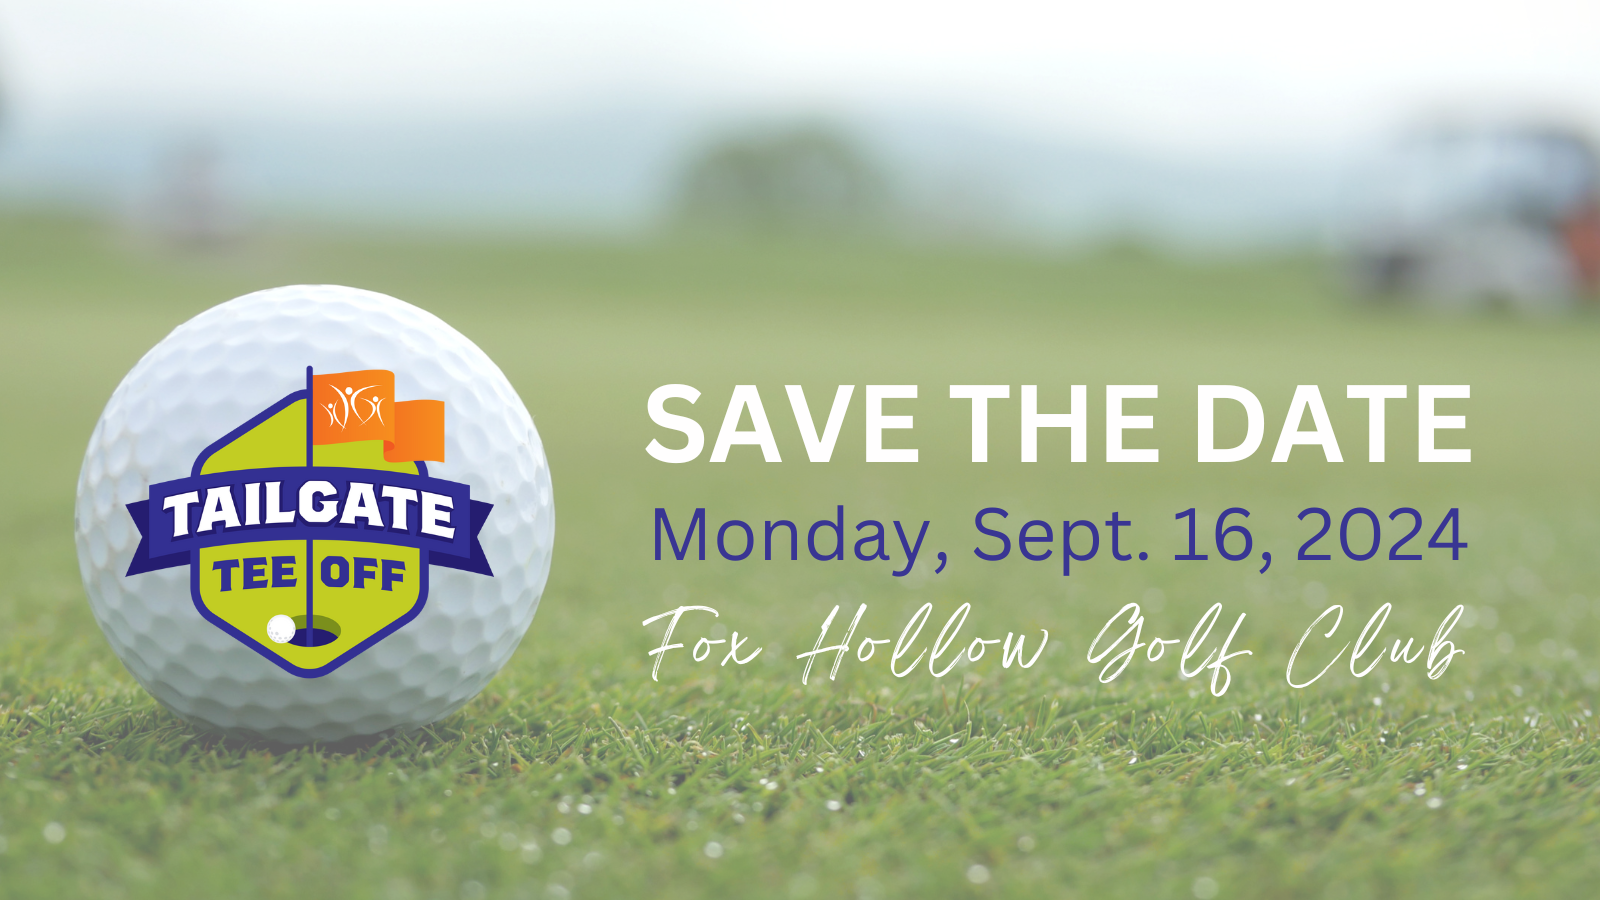 Tailgate Tee off - Save The Date